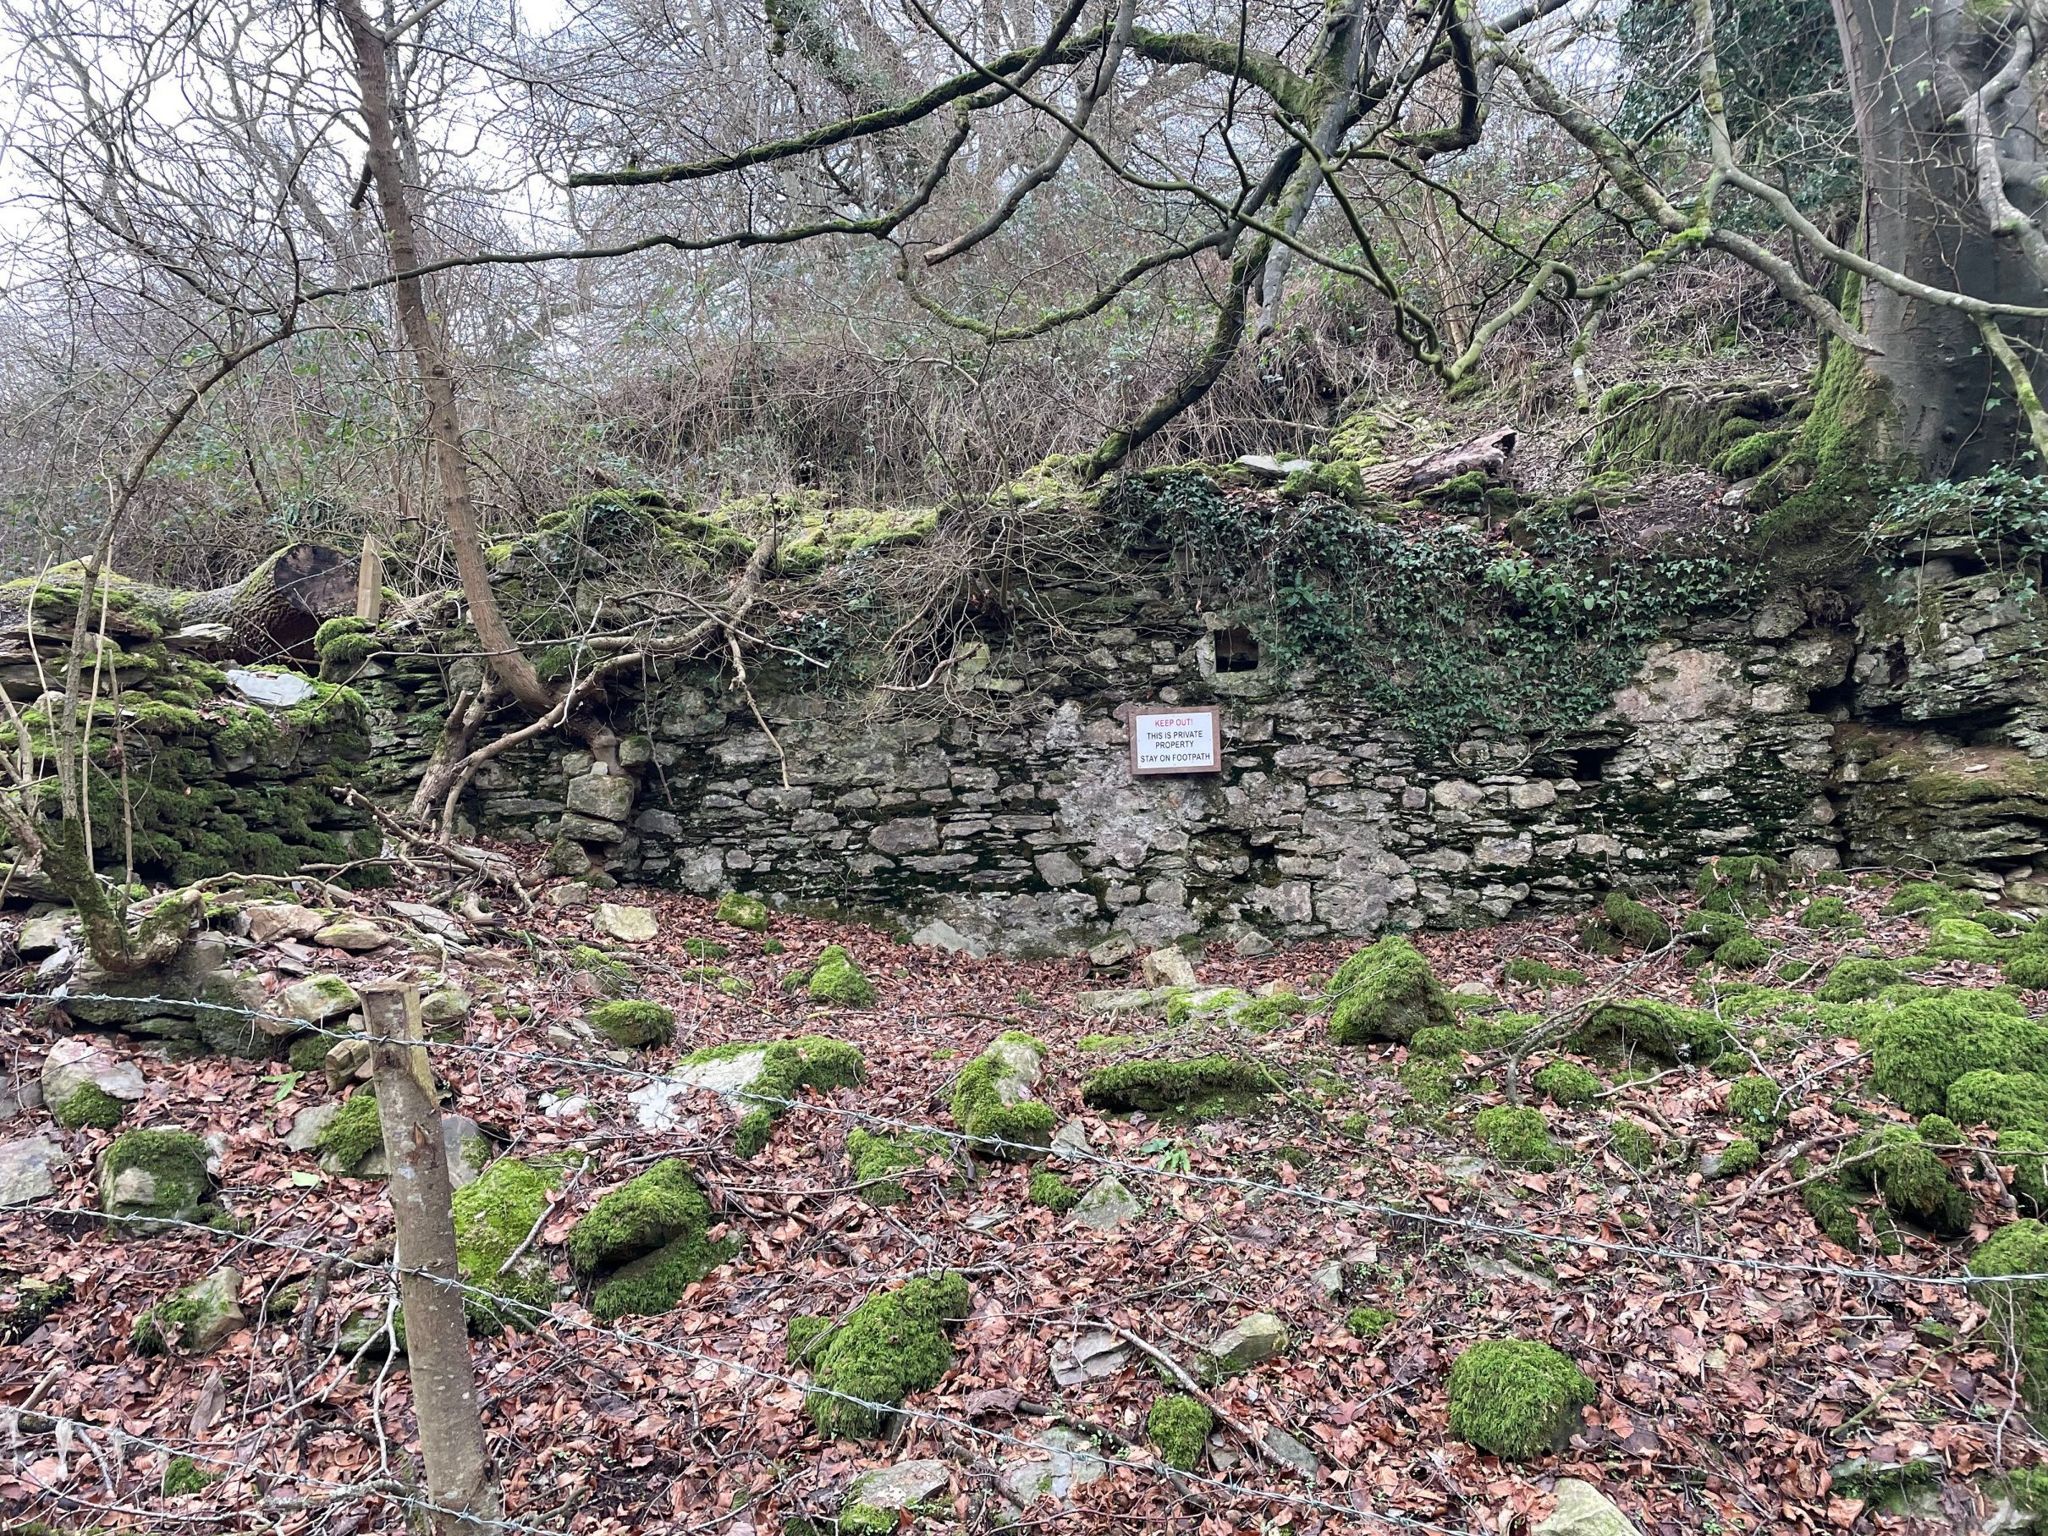 The ruins of Bickham Mill in Clicket, overgrown with trees and bushes 